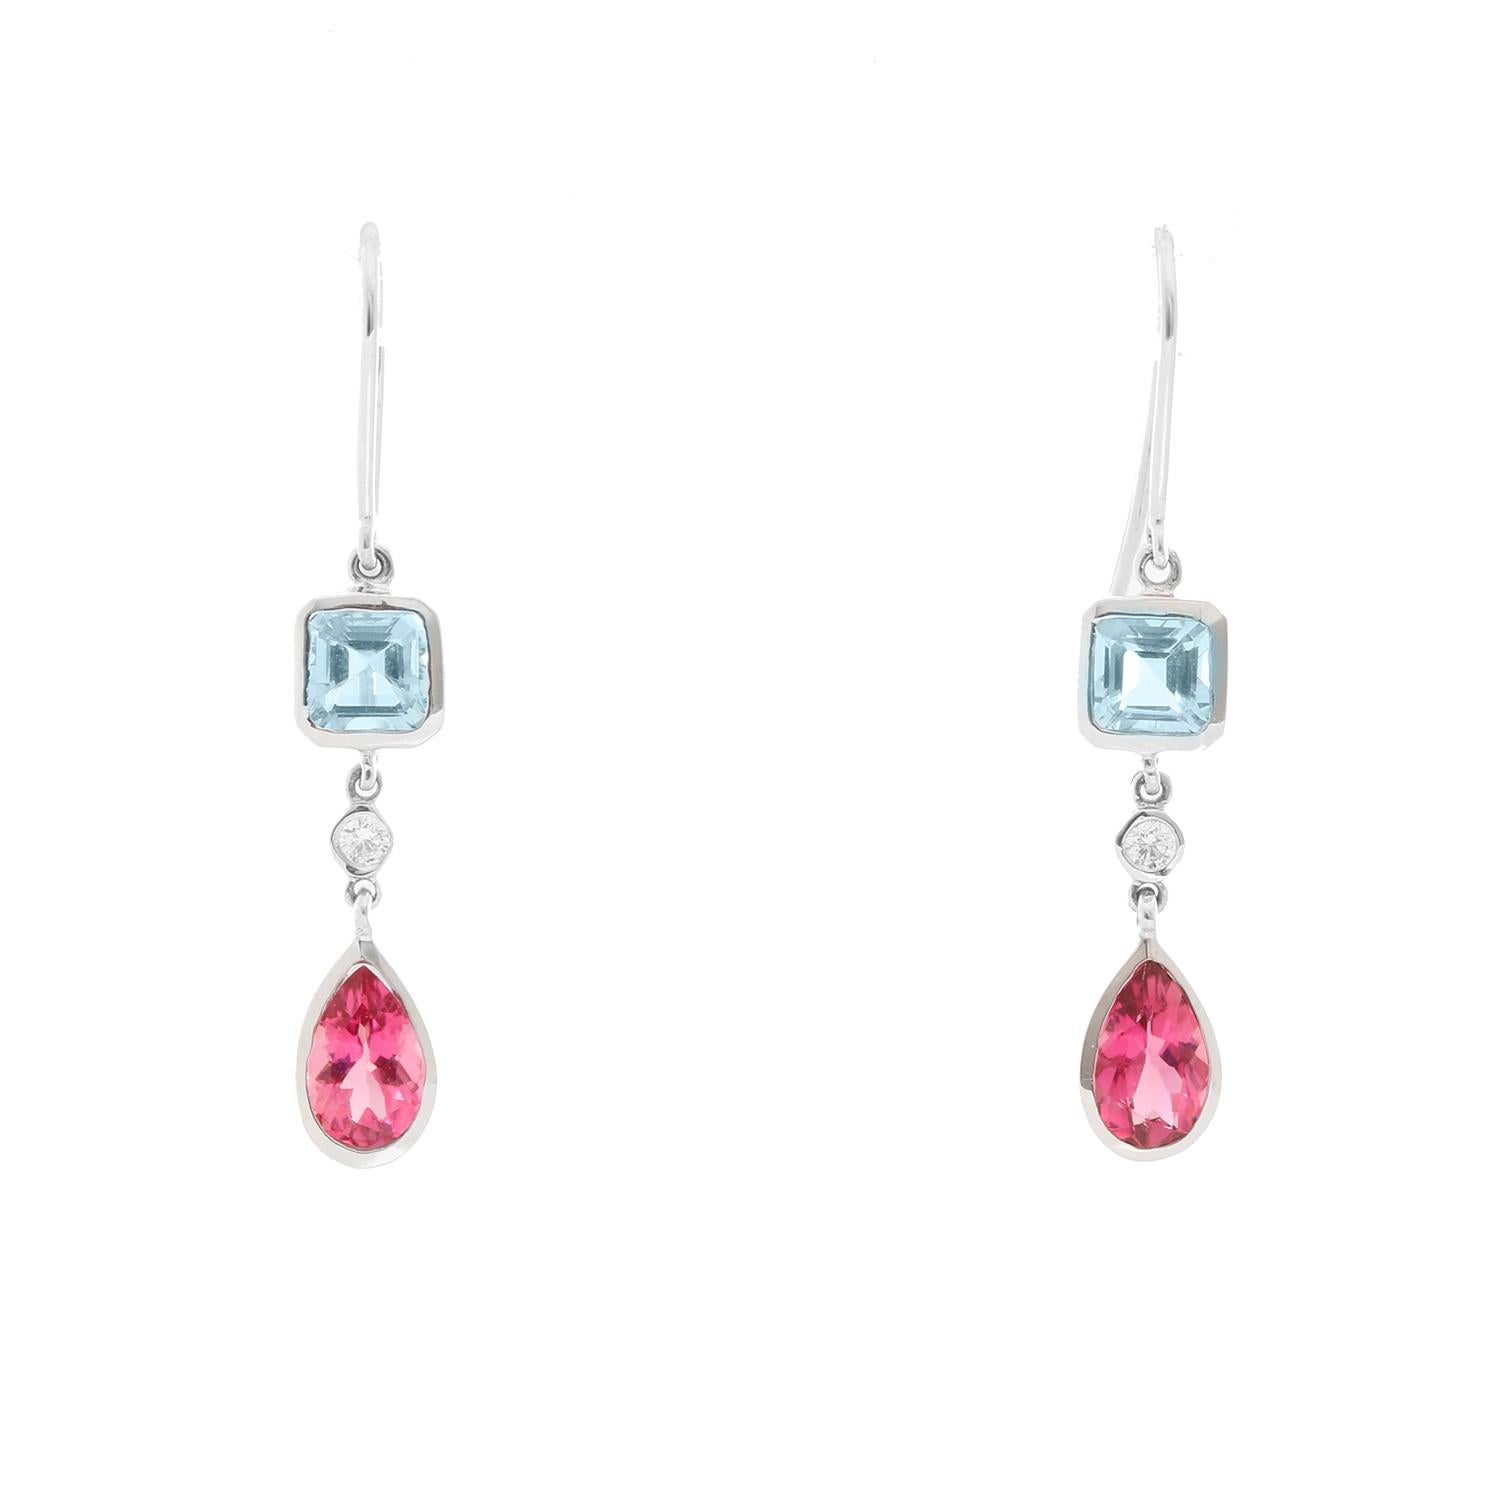 Tiffany and Co. Pink Tourmaline and Aquamarine Earrings and Necklace at ...